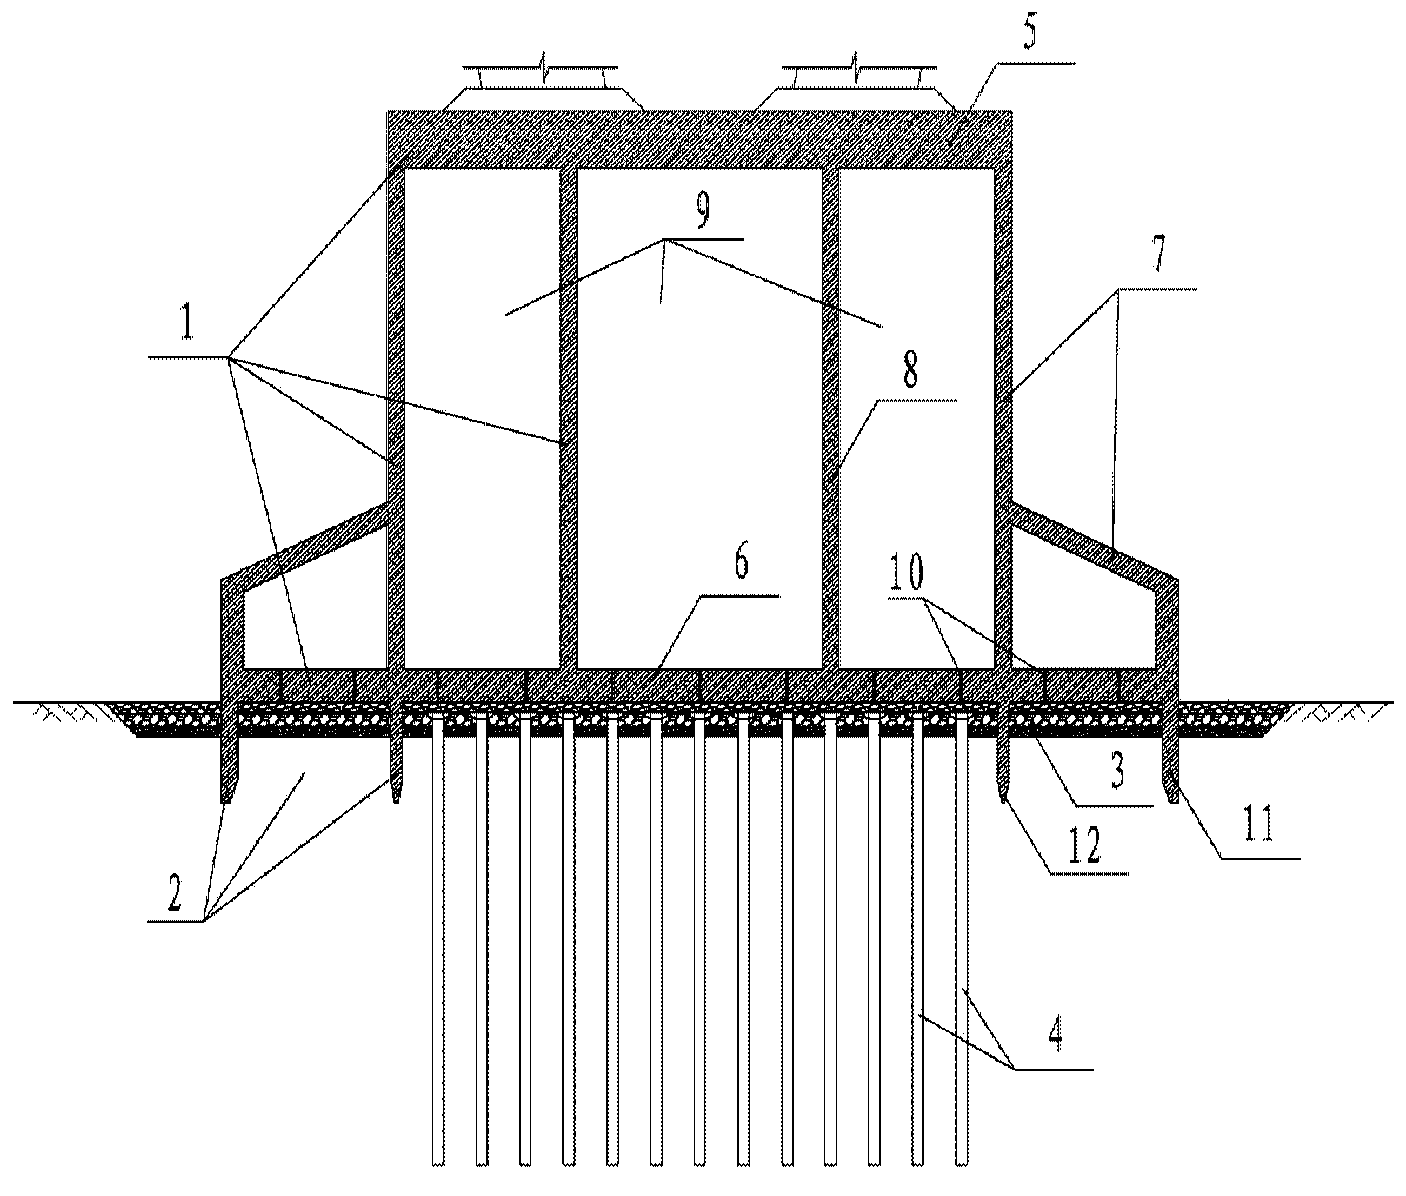 Caisson composite foundation provided with suction type apron shells and semi-rigid connection piles